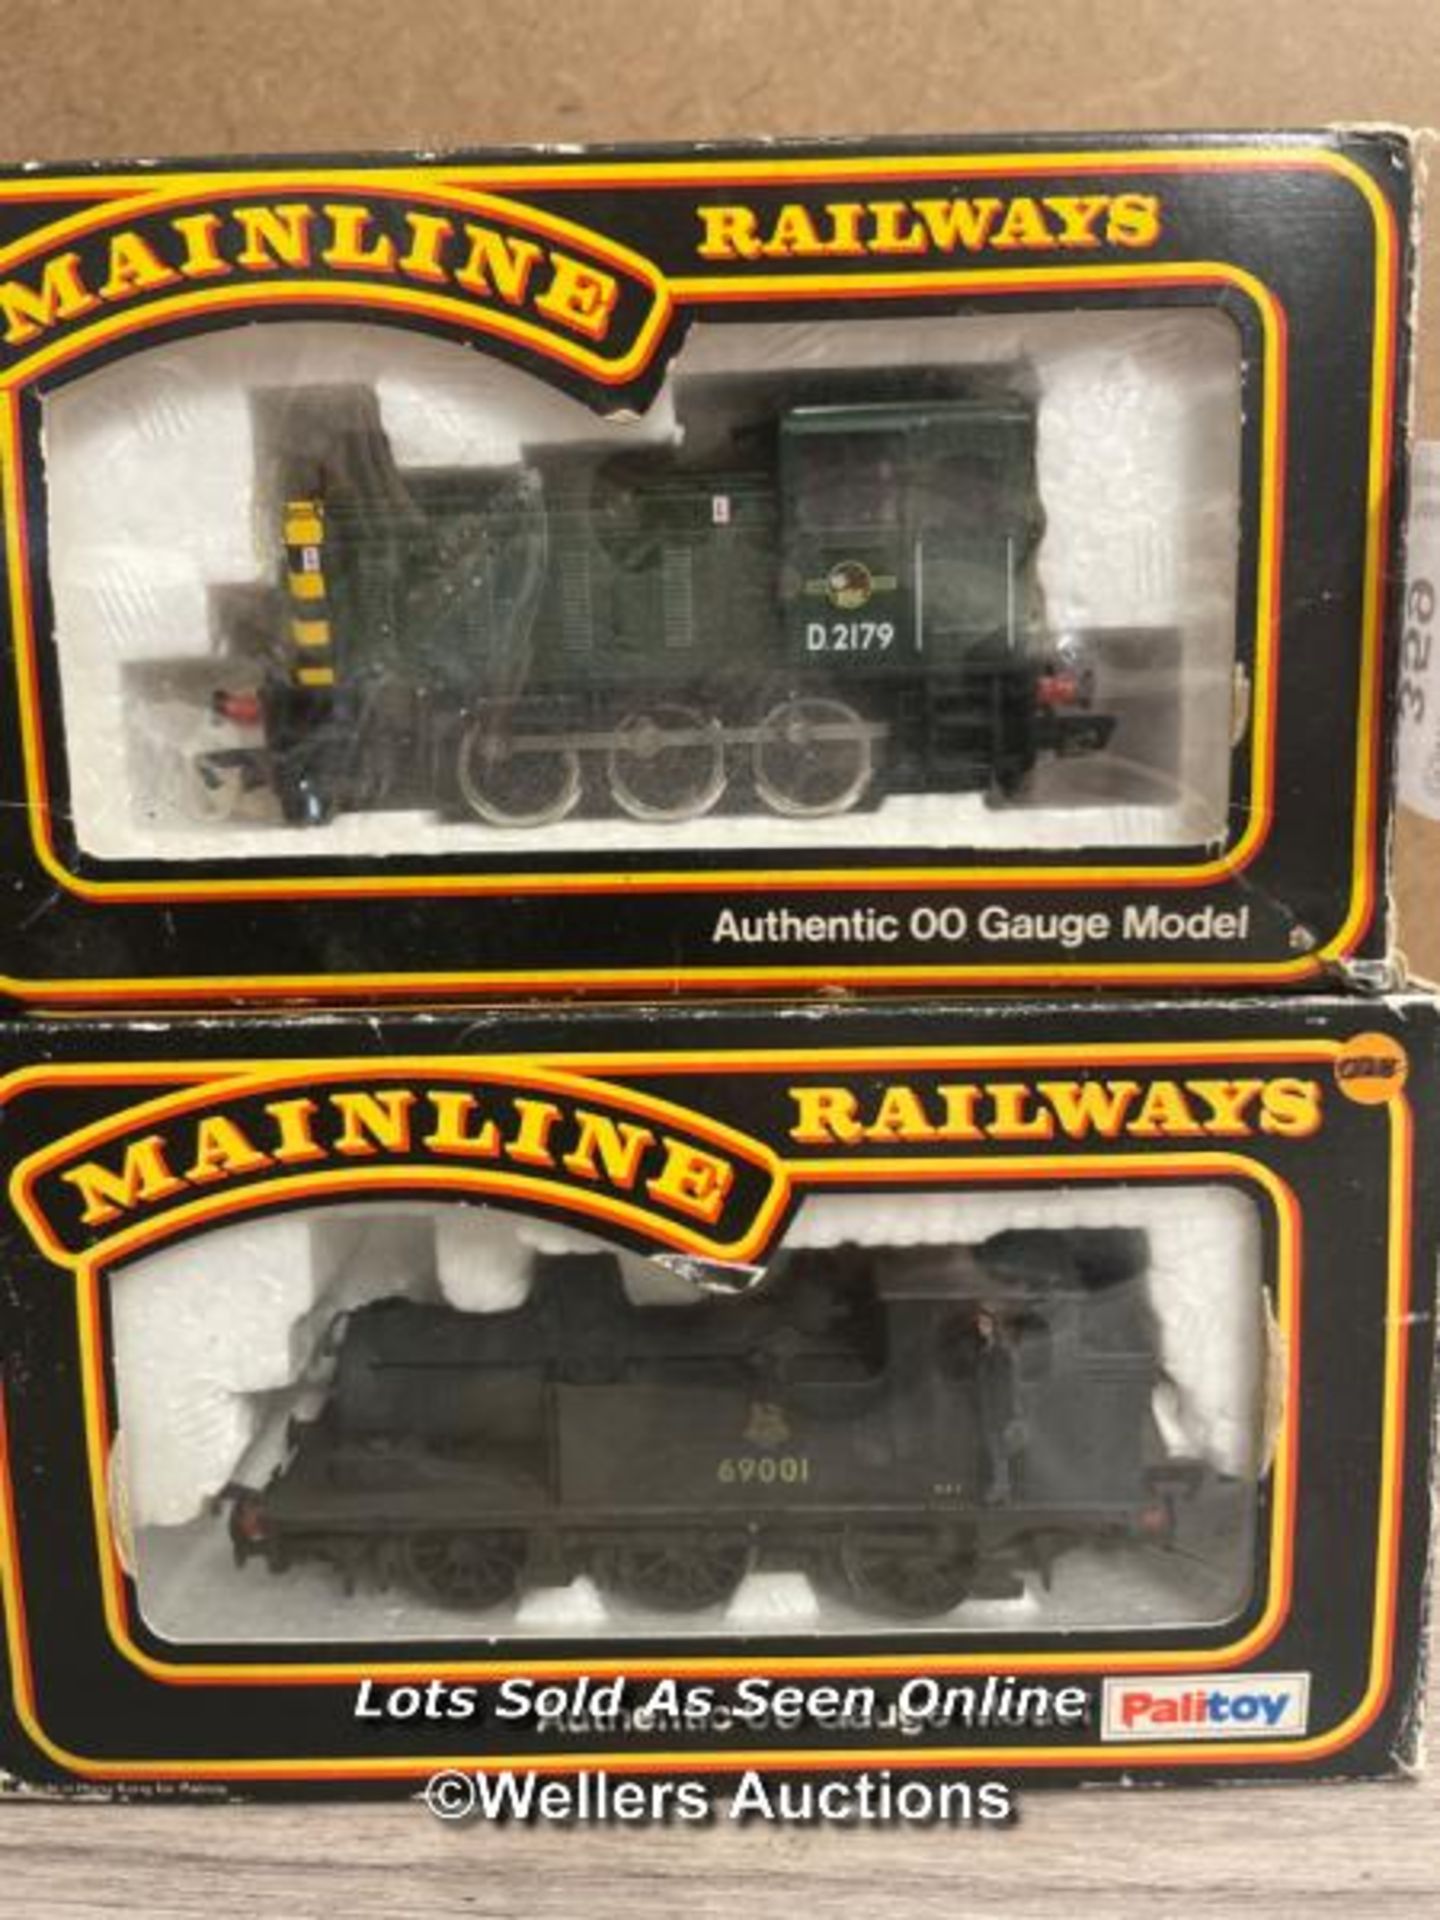 MAINLINE RAILWAYS 00 GAUGE, TWO 0-6-0 LOCOMOTIVES, BOXED, SEE PHOTOS FOR DETAILS